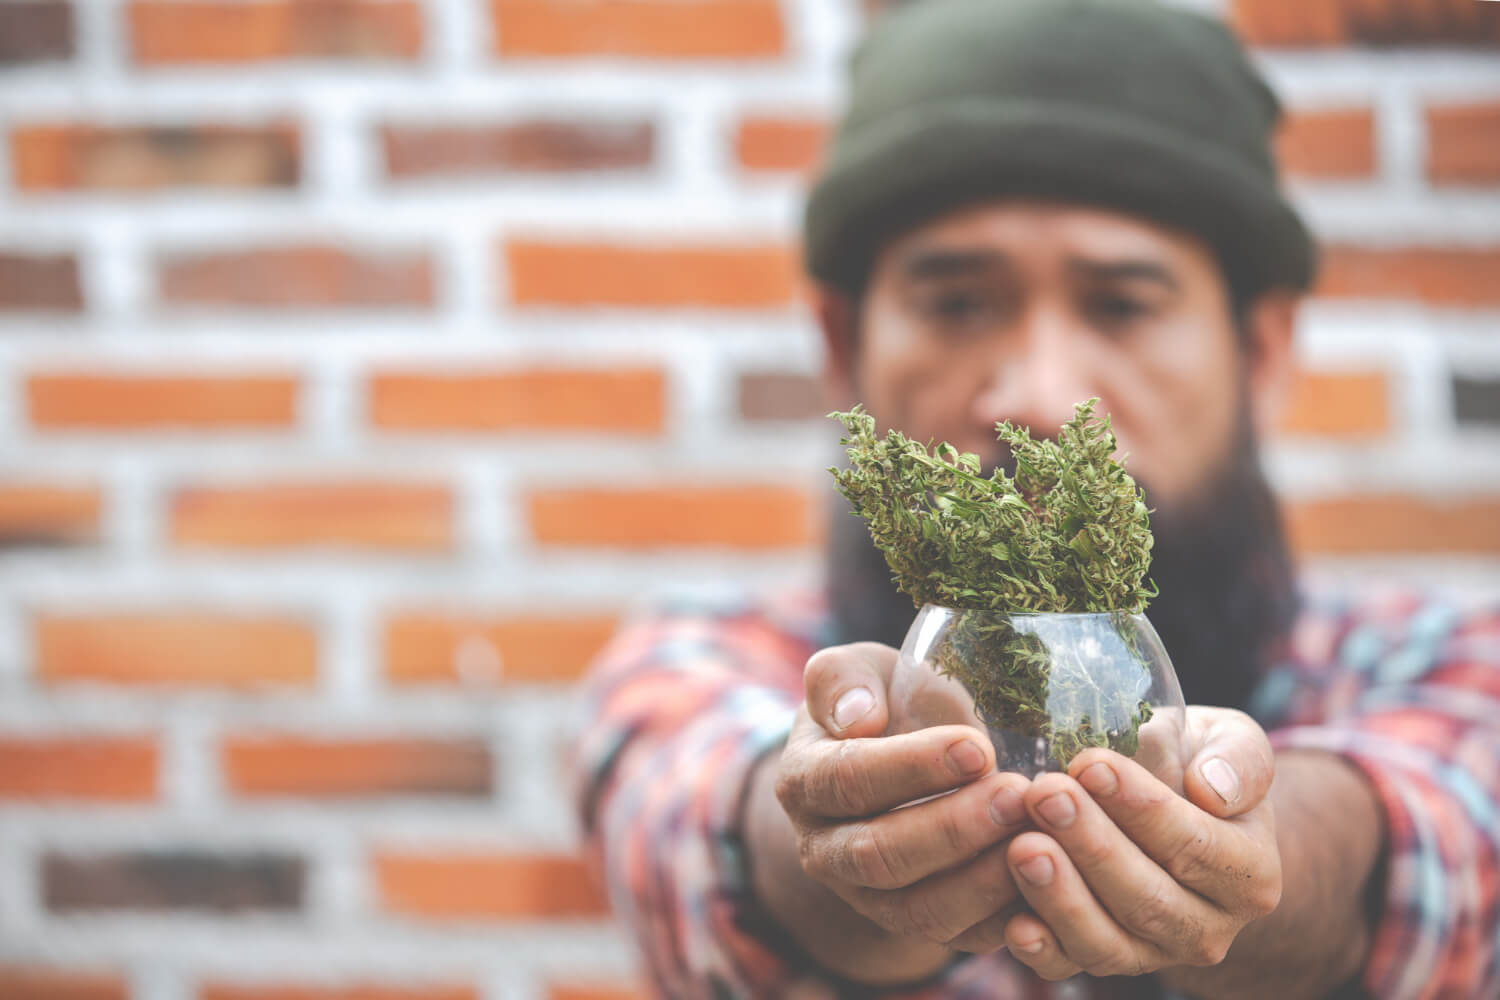 Congressional Democrats reintroduced the Marijuana Opportunity Reinvestment and Expungement (MORE) Act